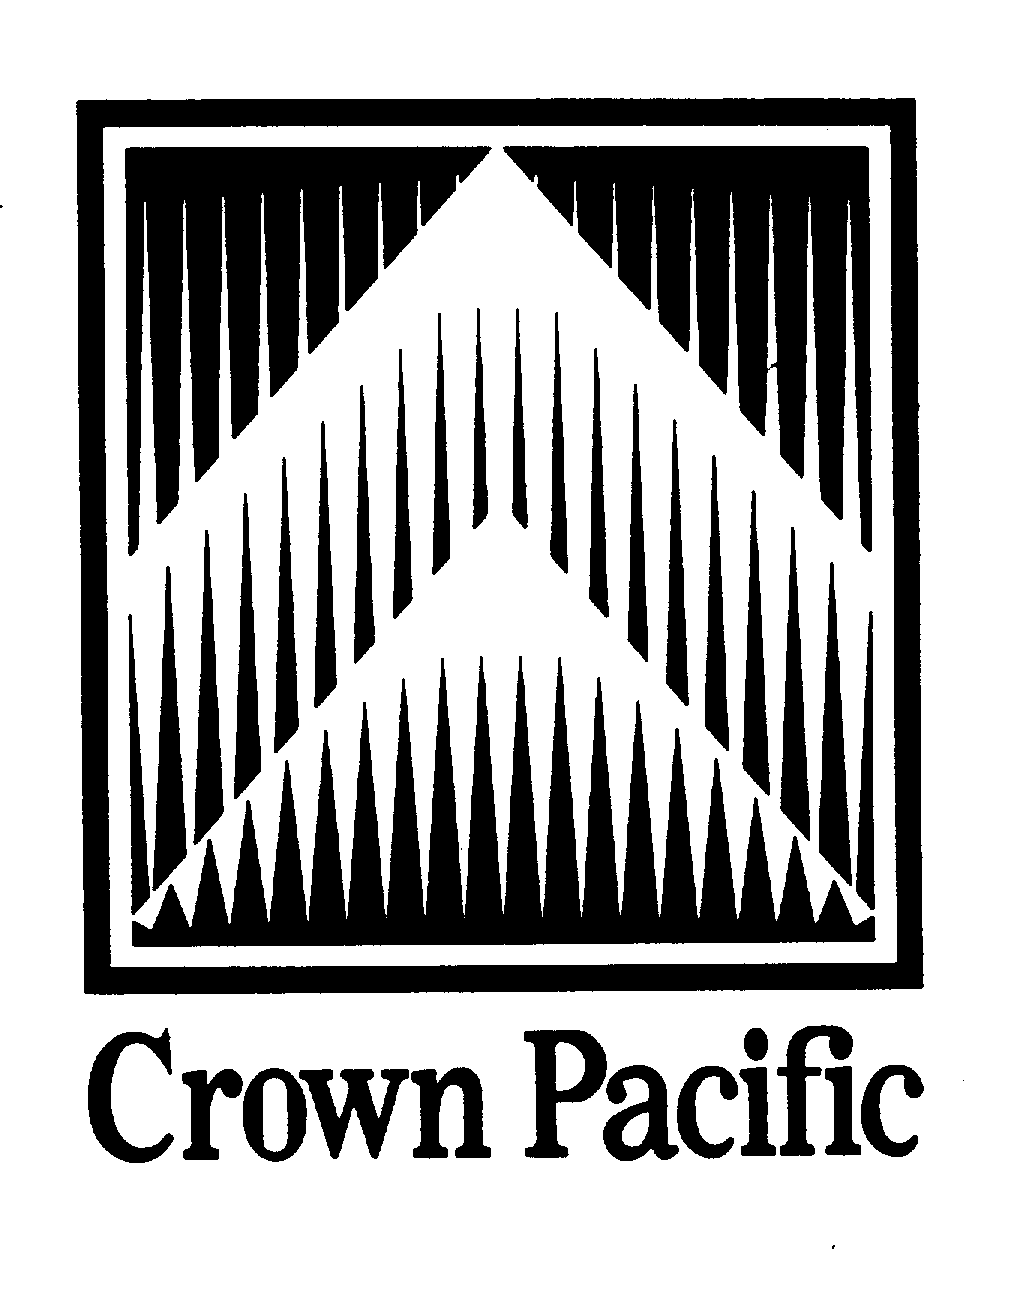 CROWN PACIFIC